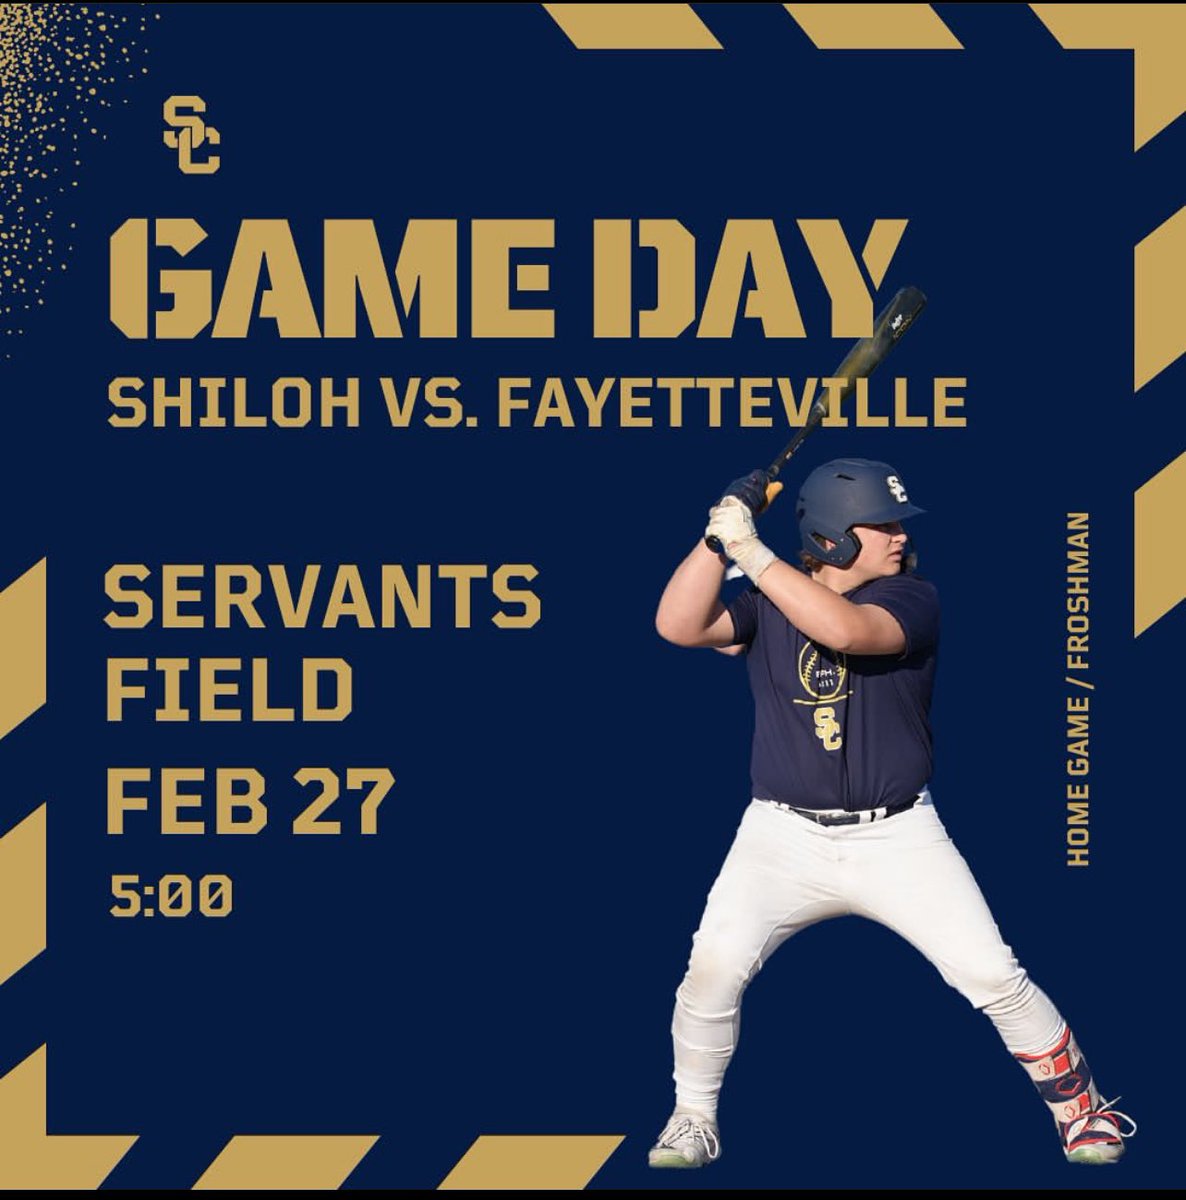 ⚾️ Game Day ⚾️ 🎟 FROSH (Non-Conference) 📍Servant’s Field 🕰 5:00 First Pitch 🆚 Fayetteville 🐶 #BurnTheShips